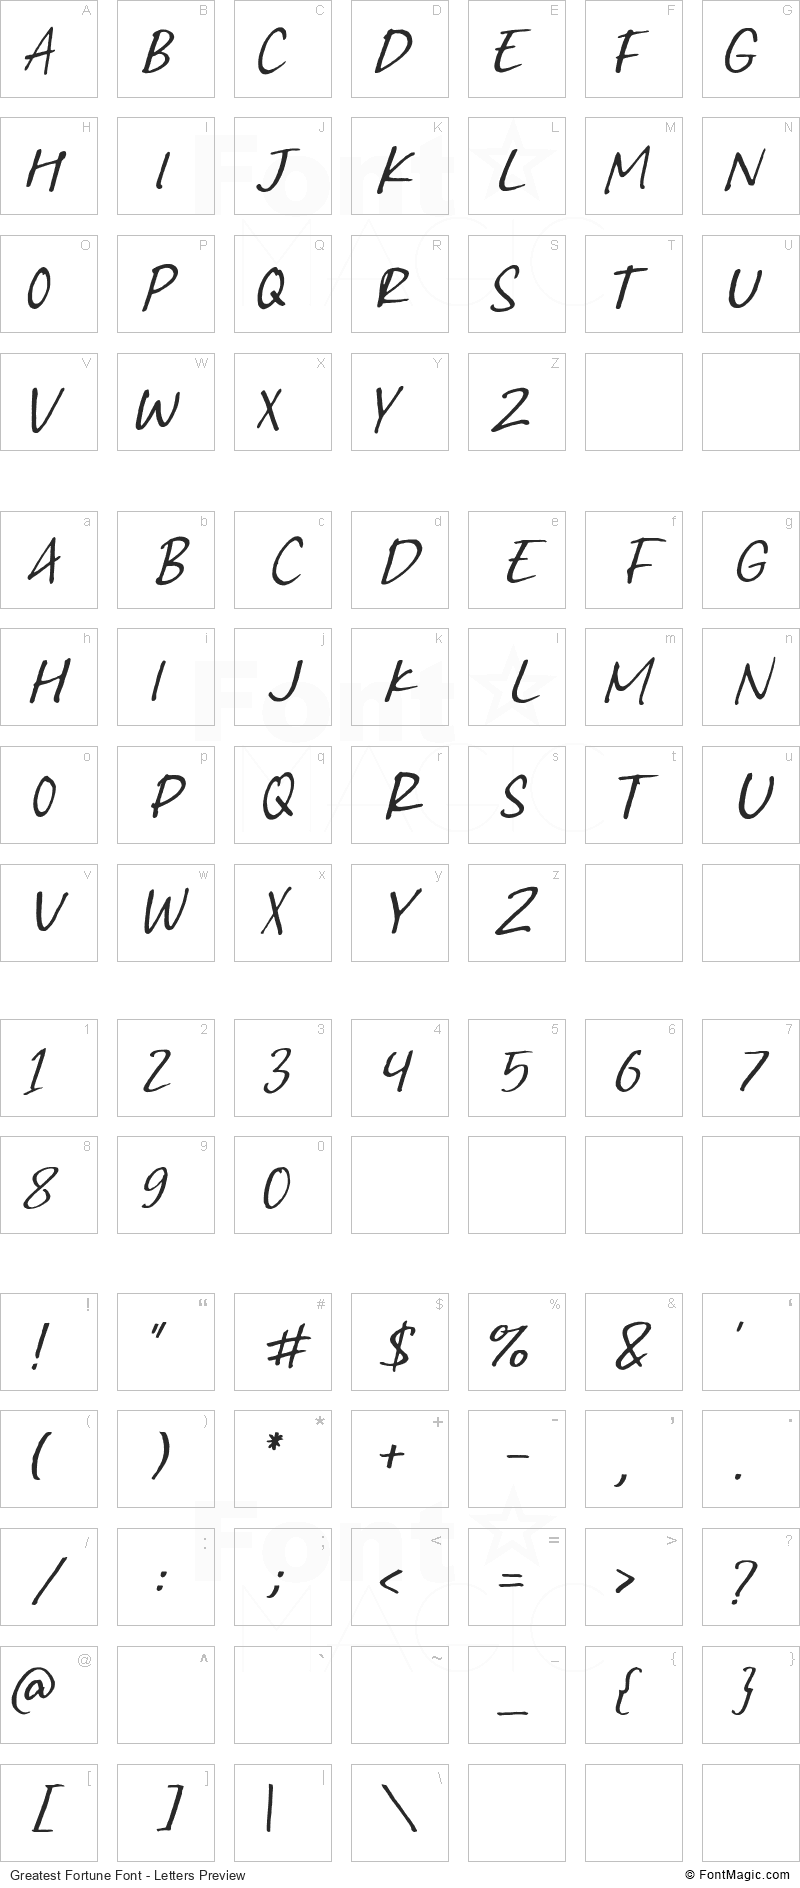 Greatest Fortune Font - All Latters Preview Chart